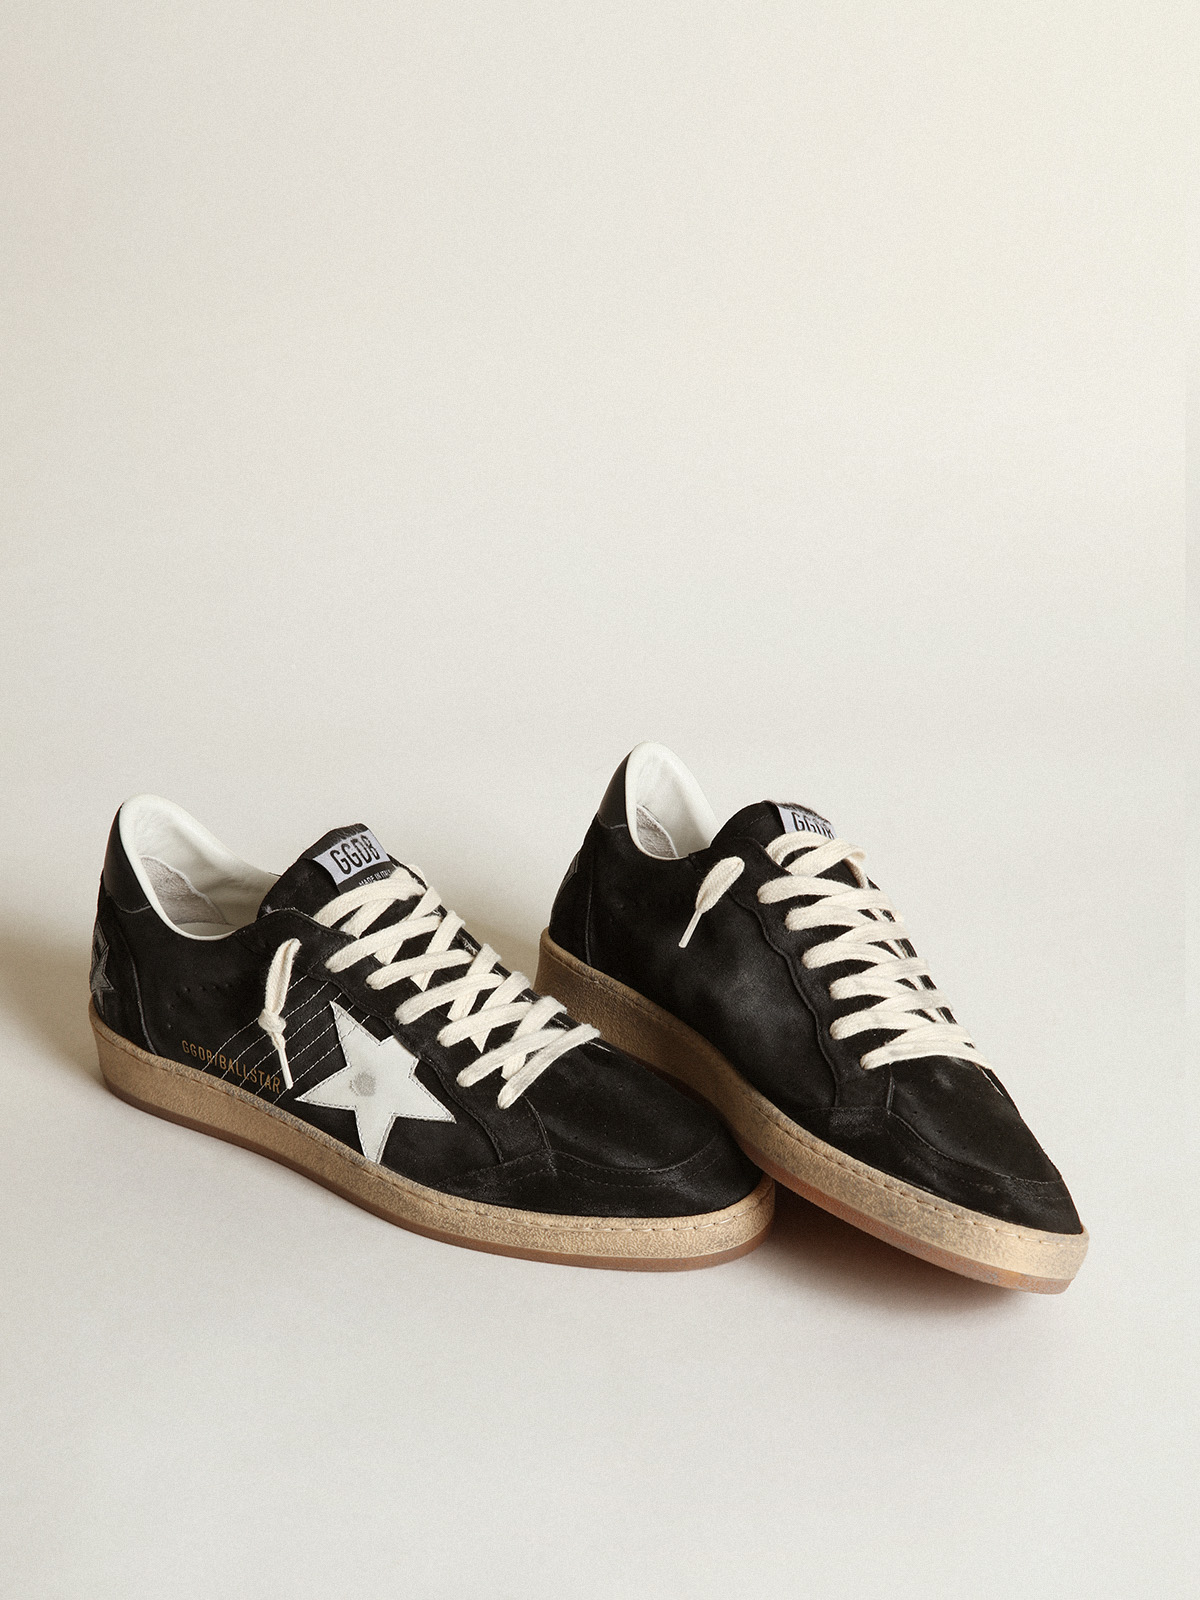 Men's Ball Star sneakers in black suede with white leather star 